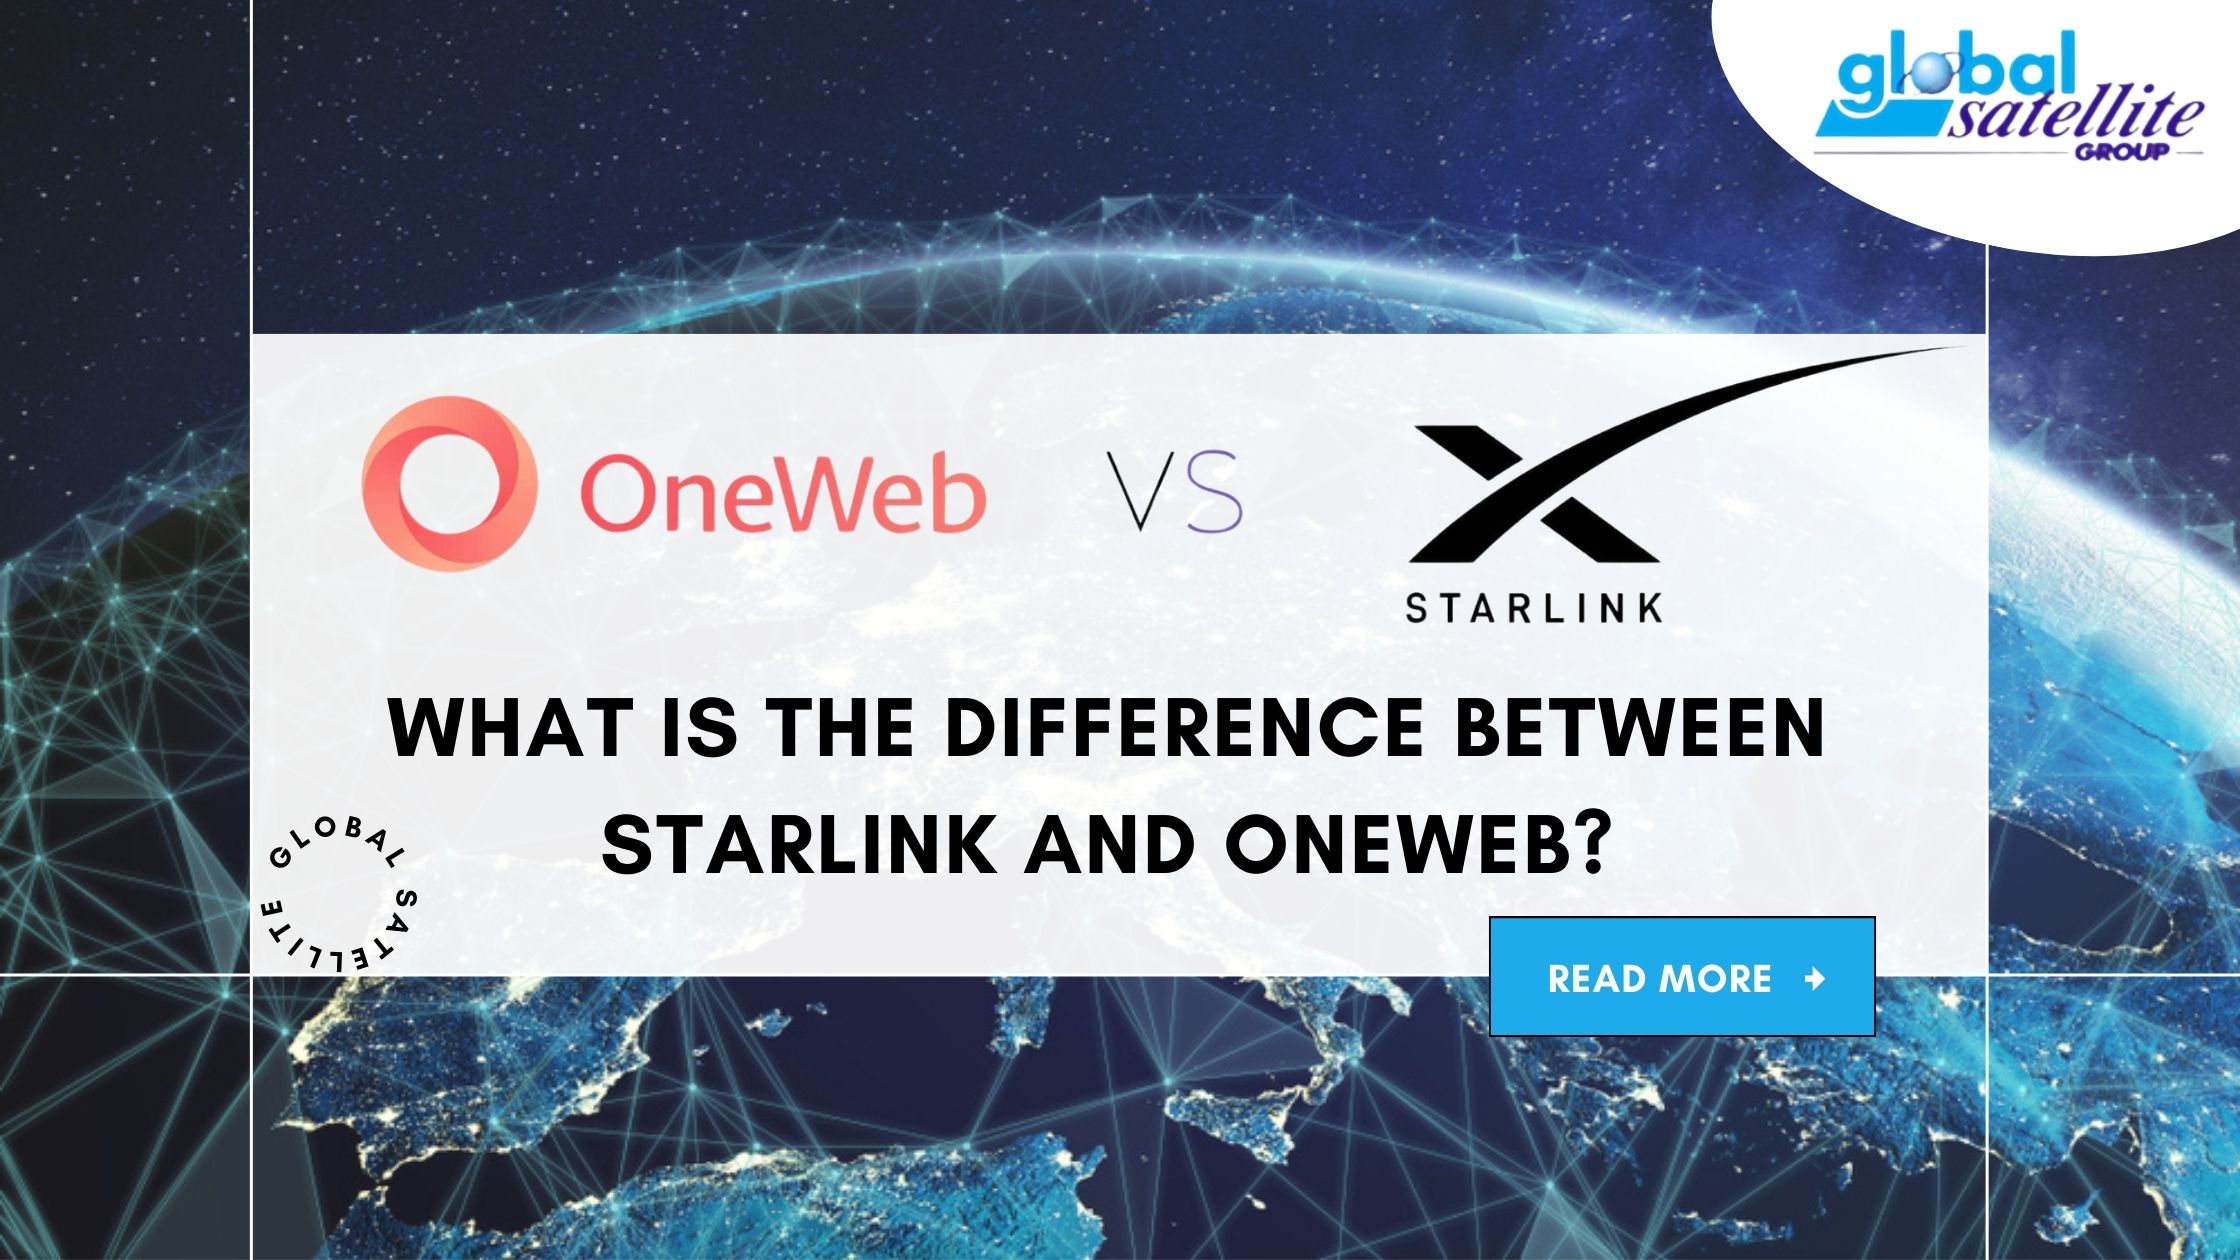 What is the difference between Starlink and OneWeb?